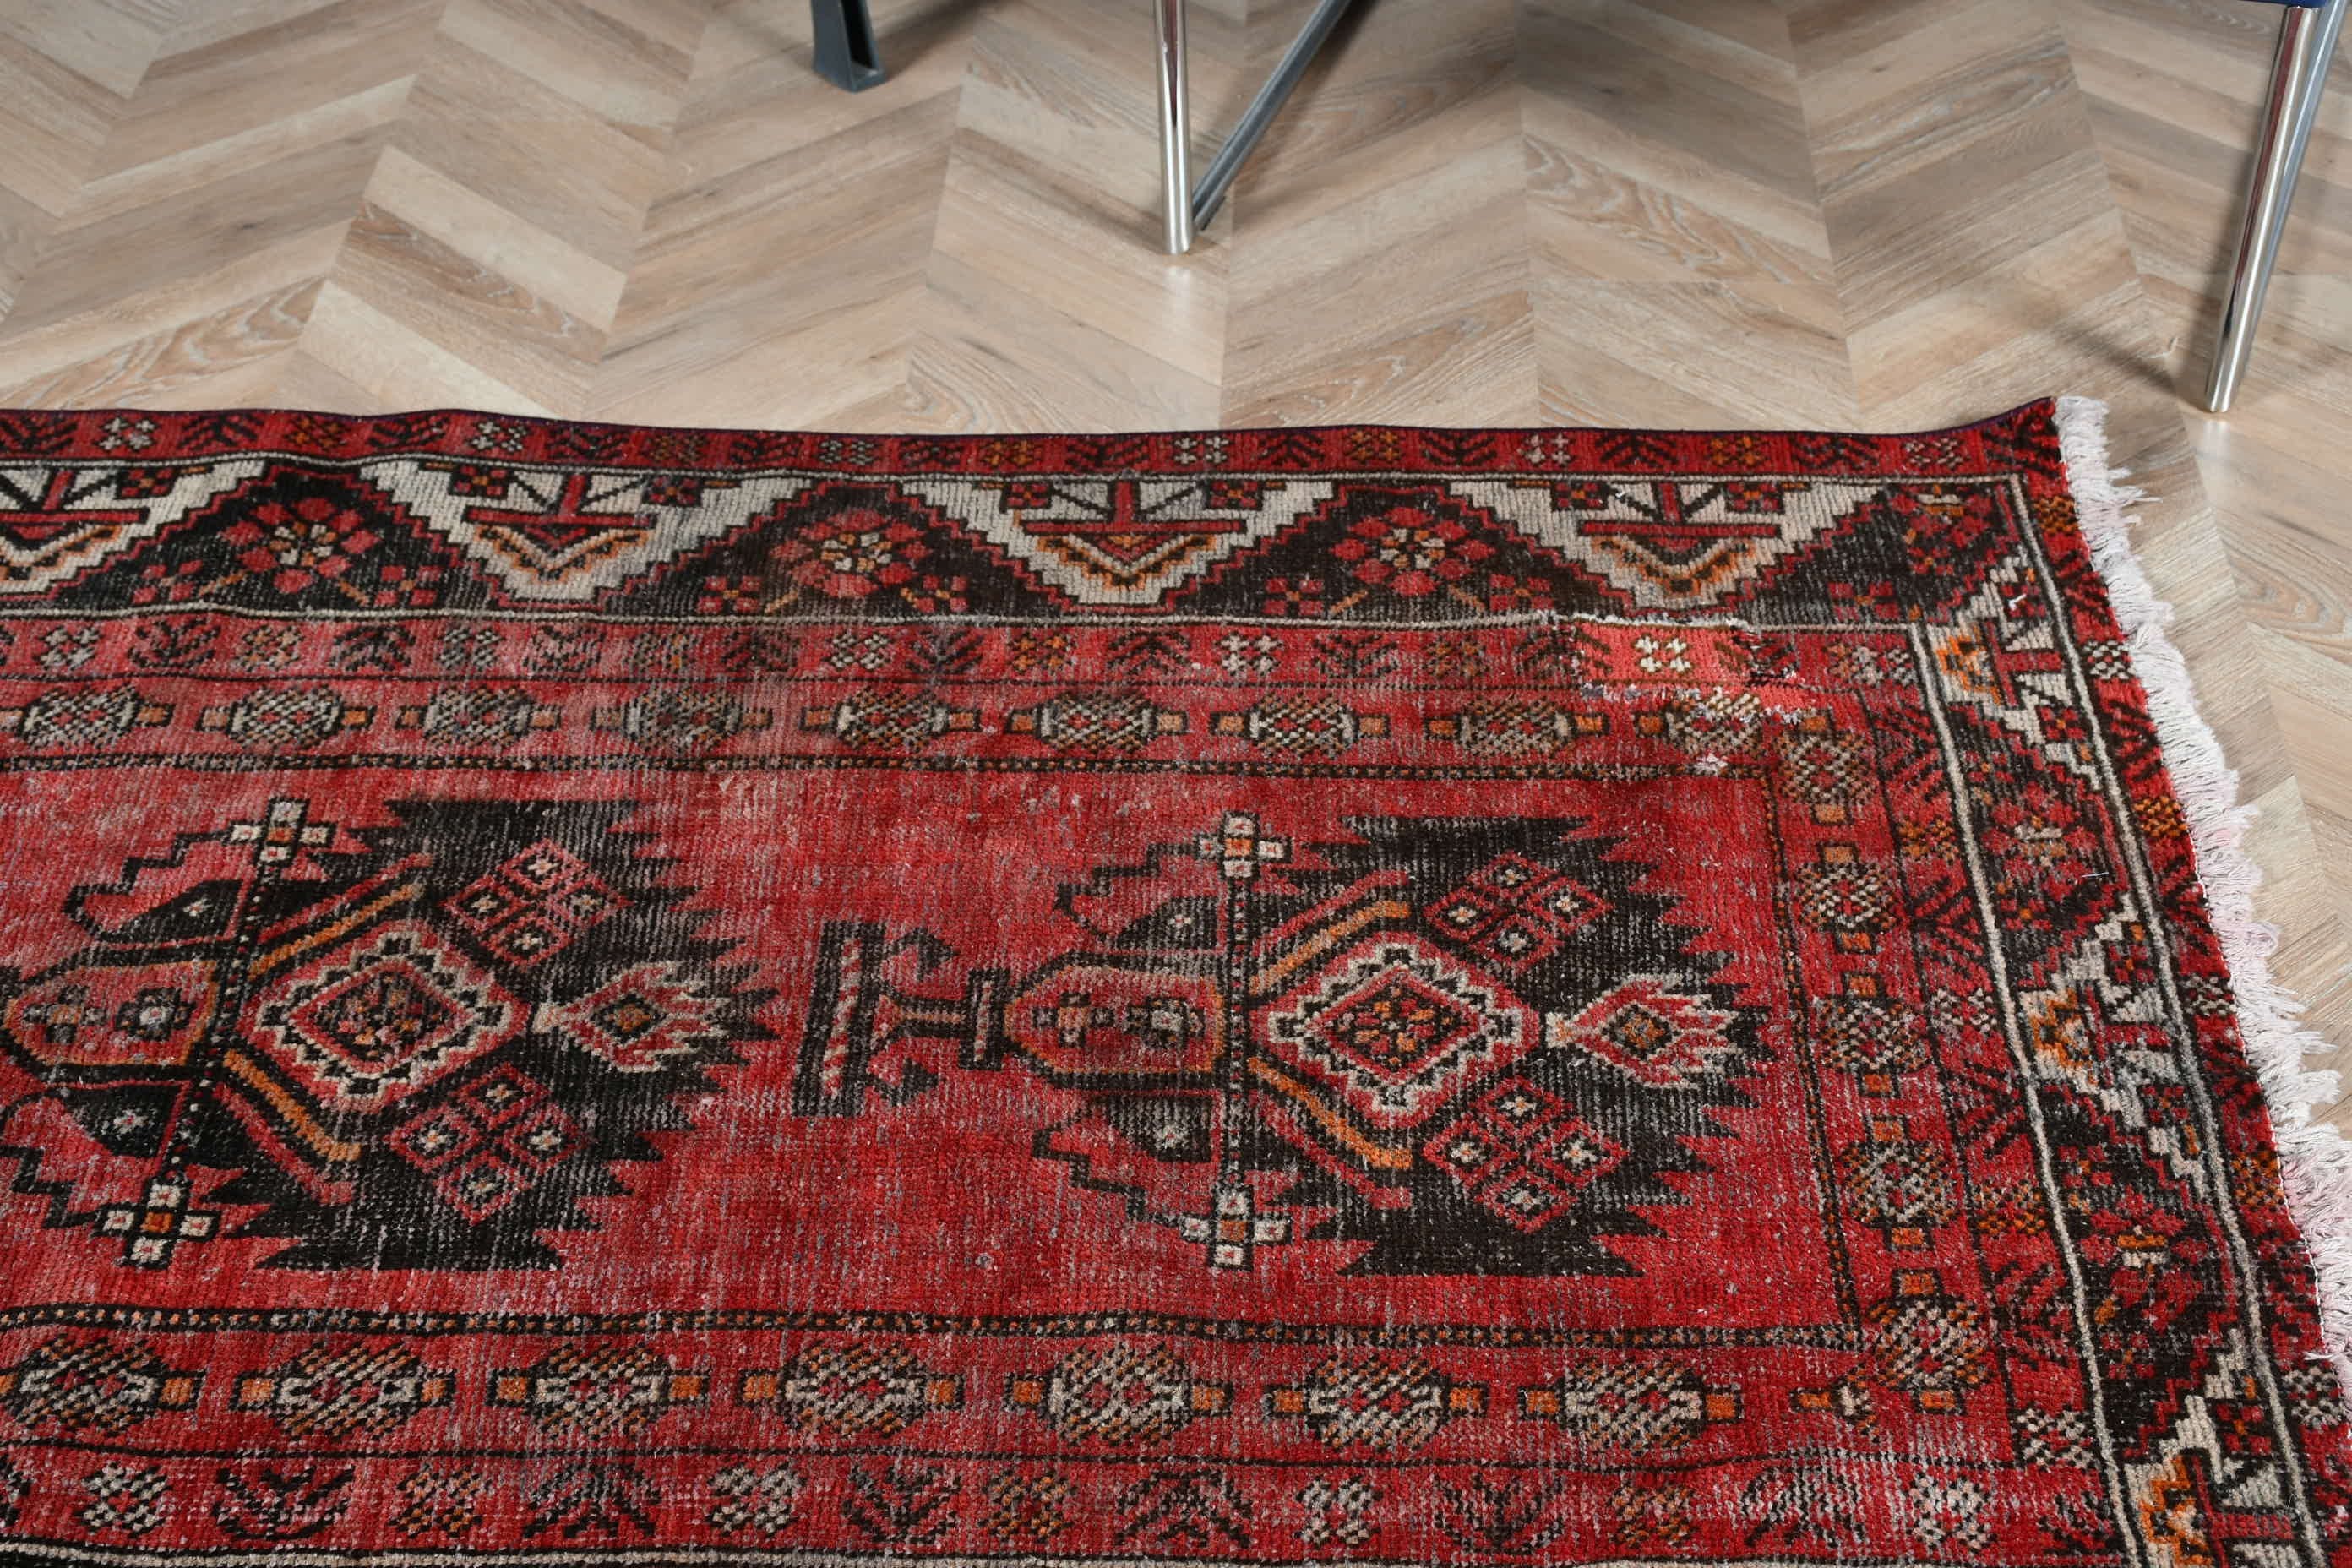 Turkish Rugs, Entry Rug, Eclectic Rugs, Cool Rug, Red Kitchen Rug, 3.7x6.4 ft Accent Rug, Vintage Rug, Rugs for Entry, Anatolian Rug